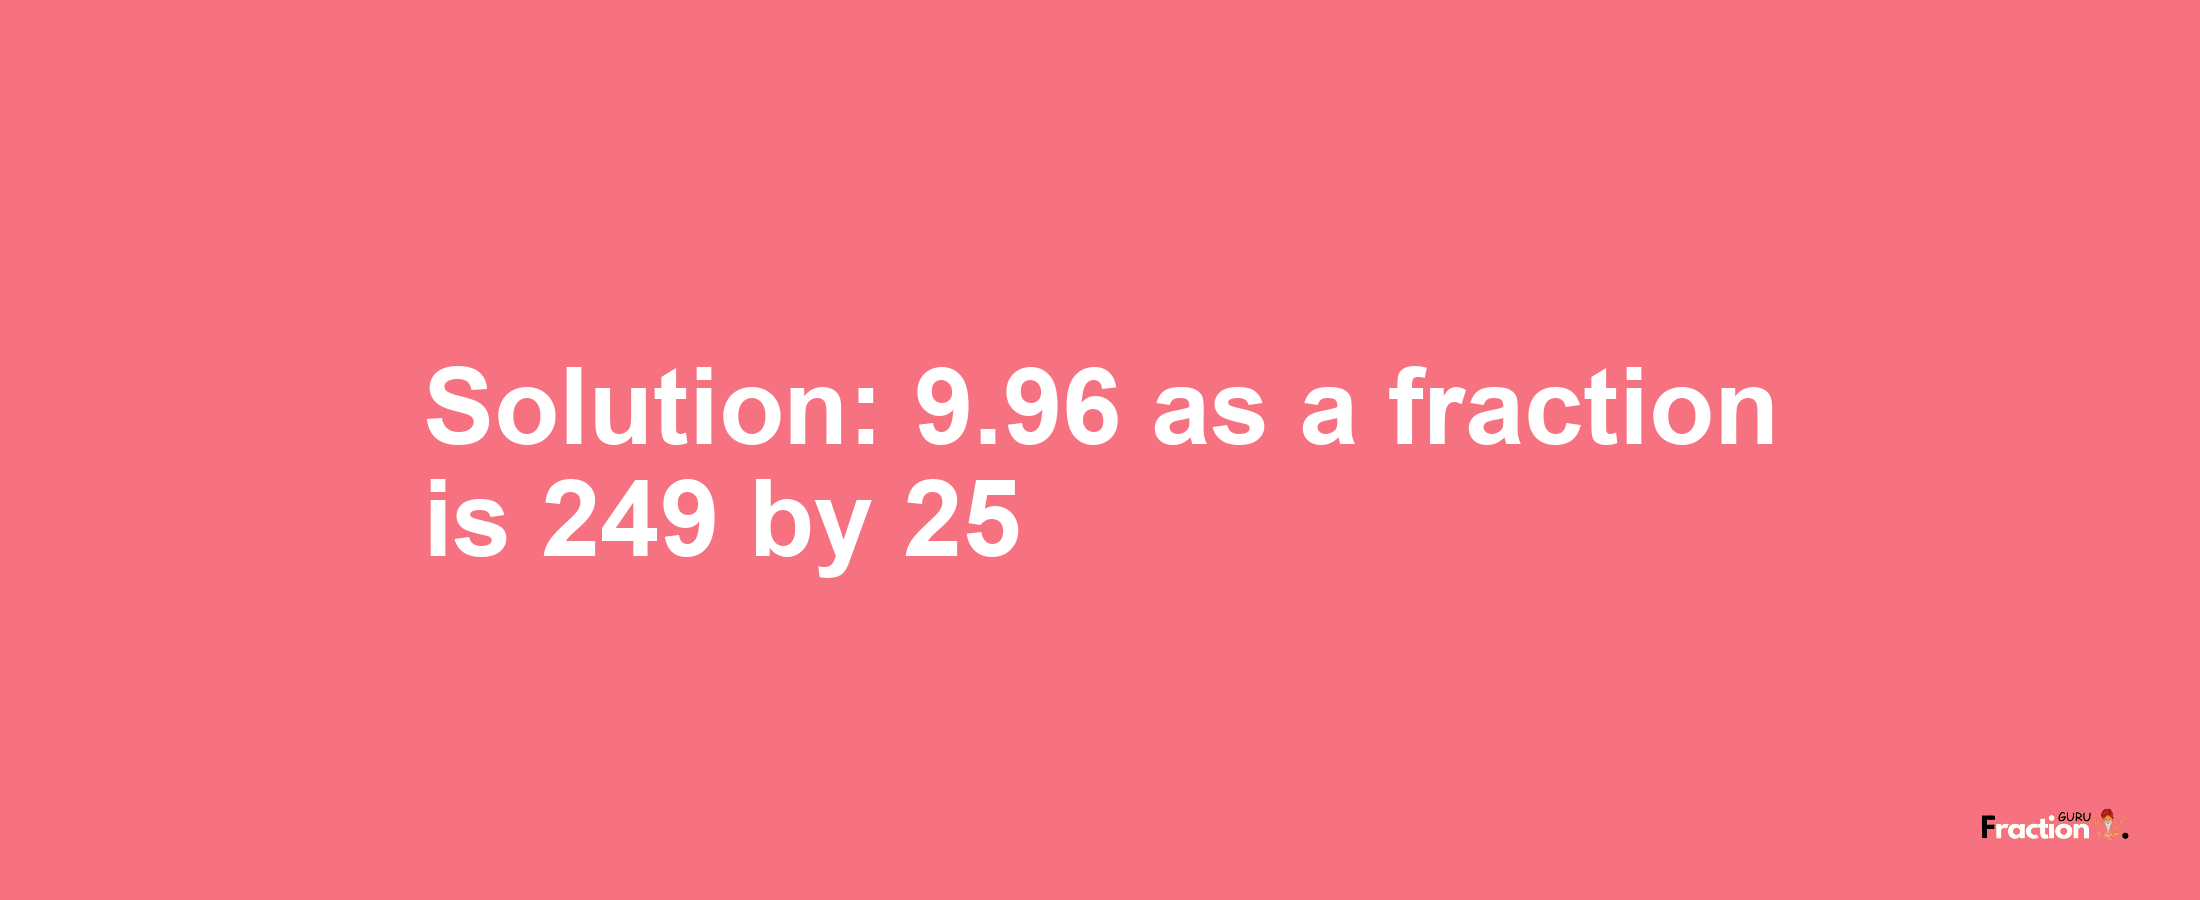 Solution:9.96 as a fraction is 249/25